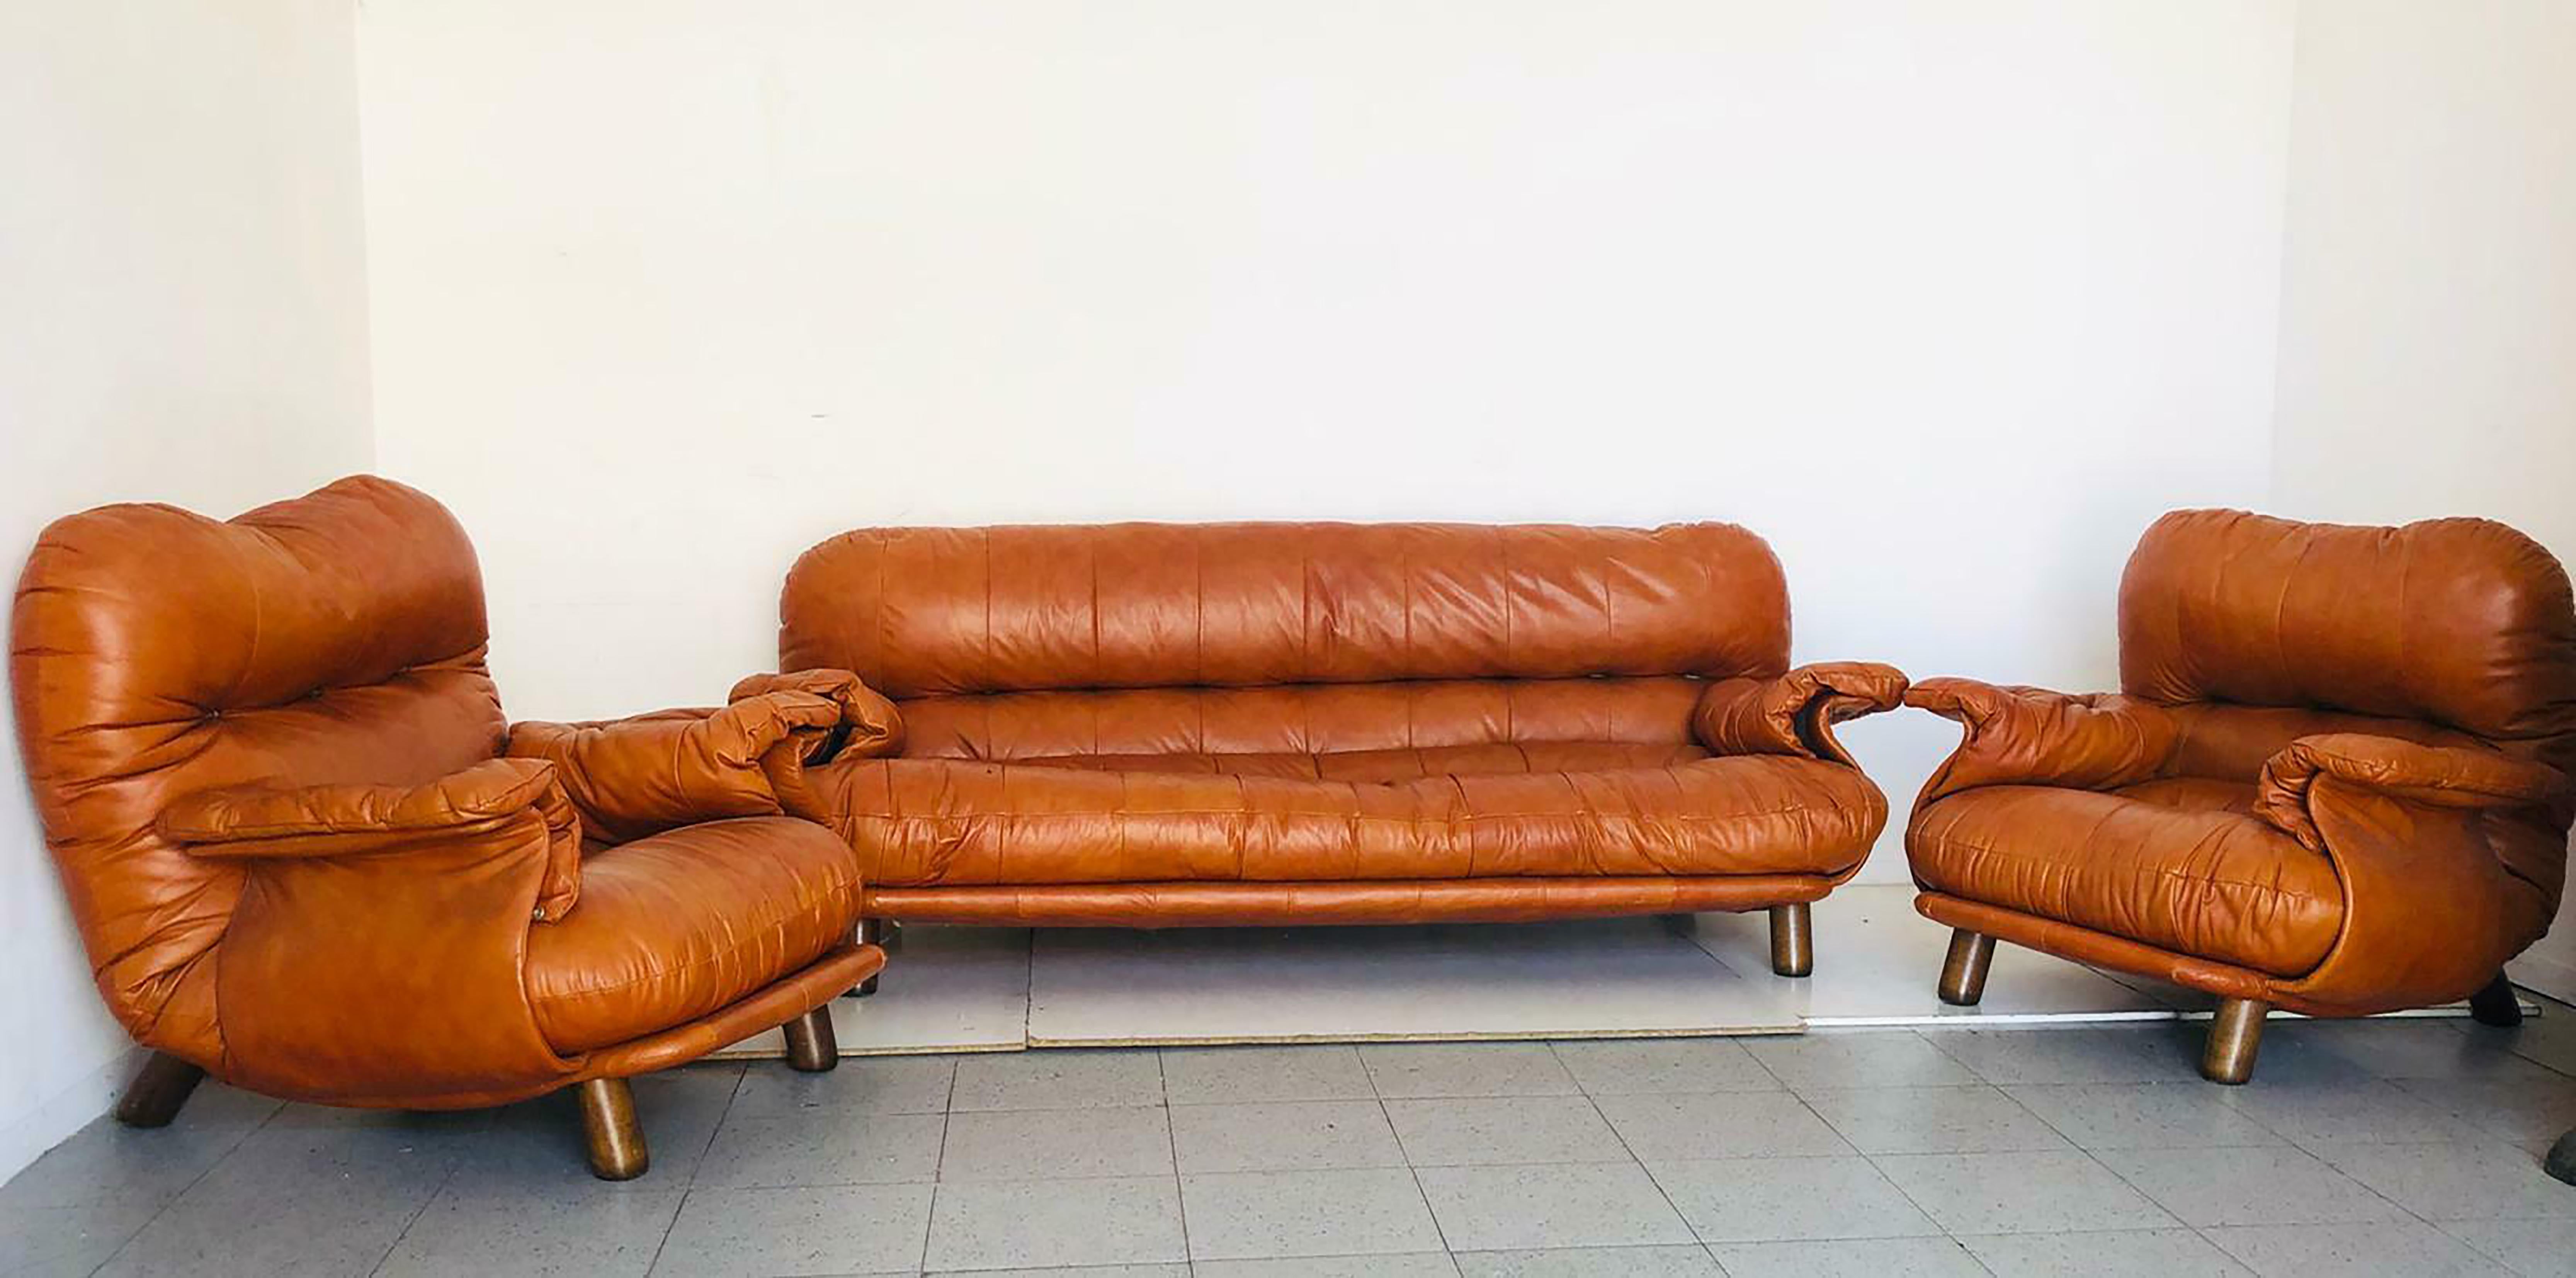 This sofa and armchairs set is an amazing set designed by E. Cobianchi for Insa presenting a peculiar design of the 1970s.

Both the sofa and the armchairs have an original brown leather covering and are made of a wooden base.

This fashionable